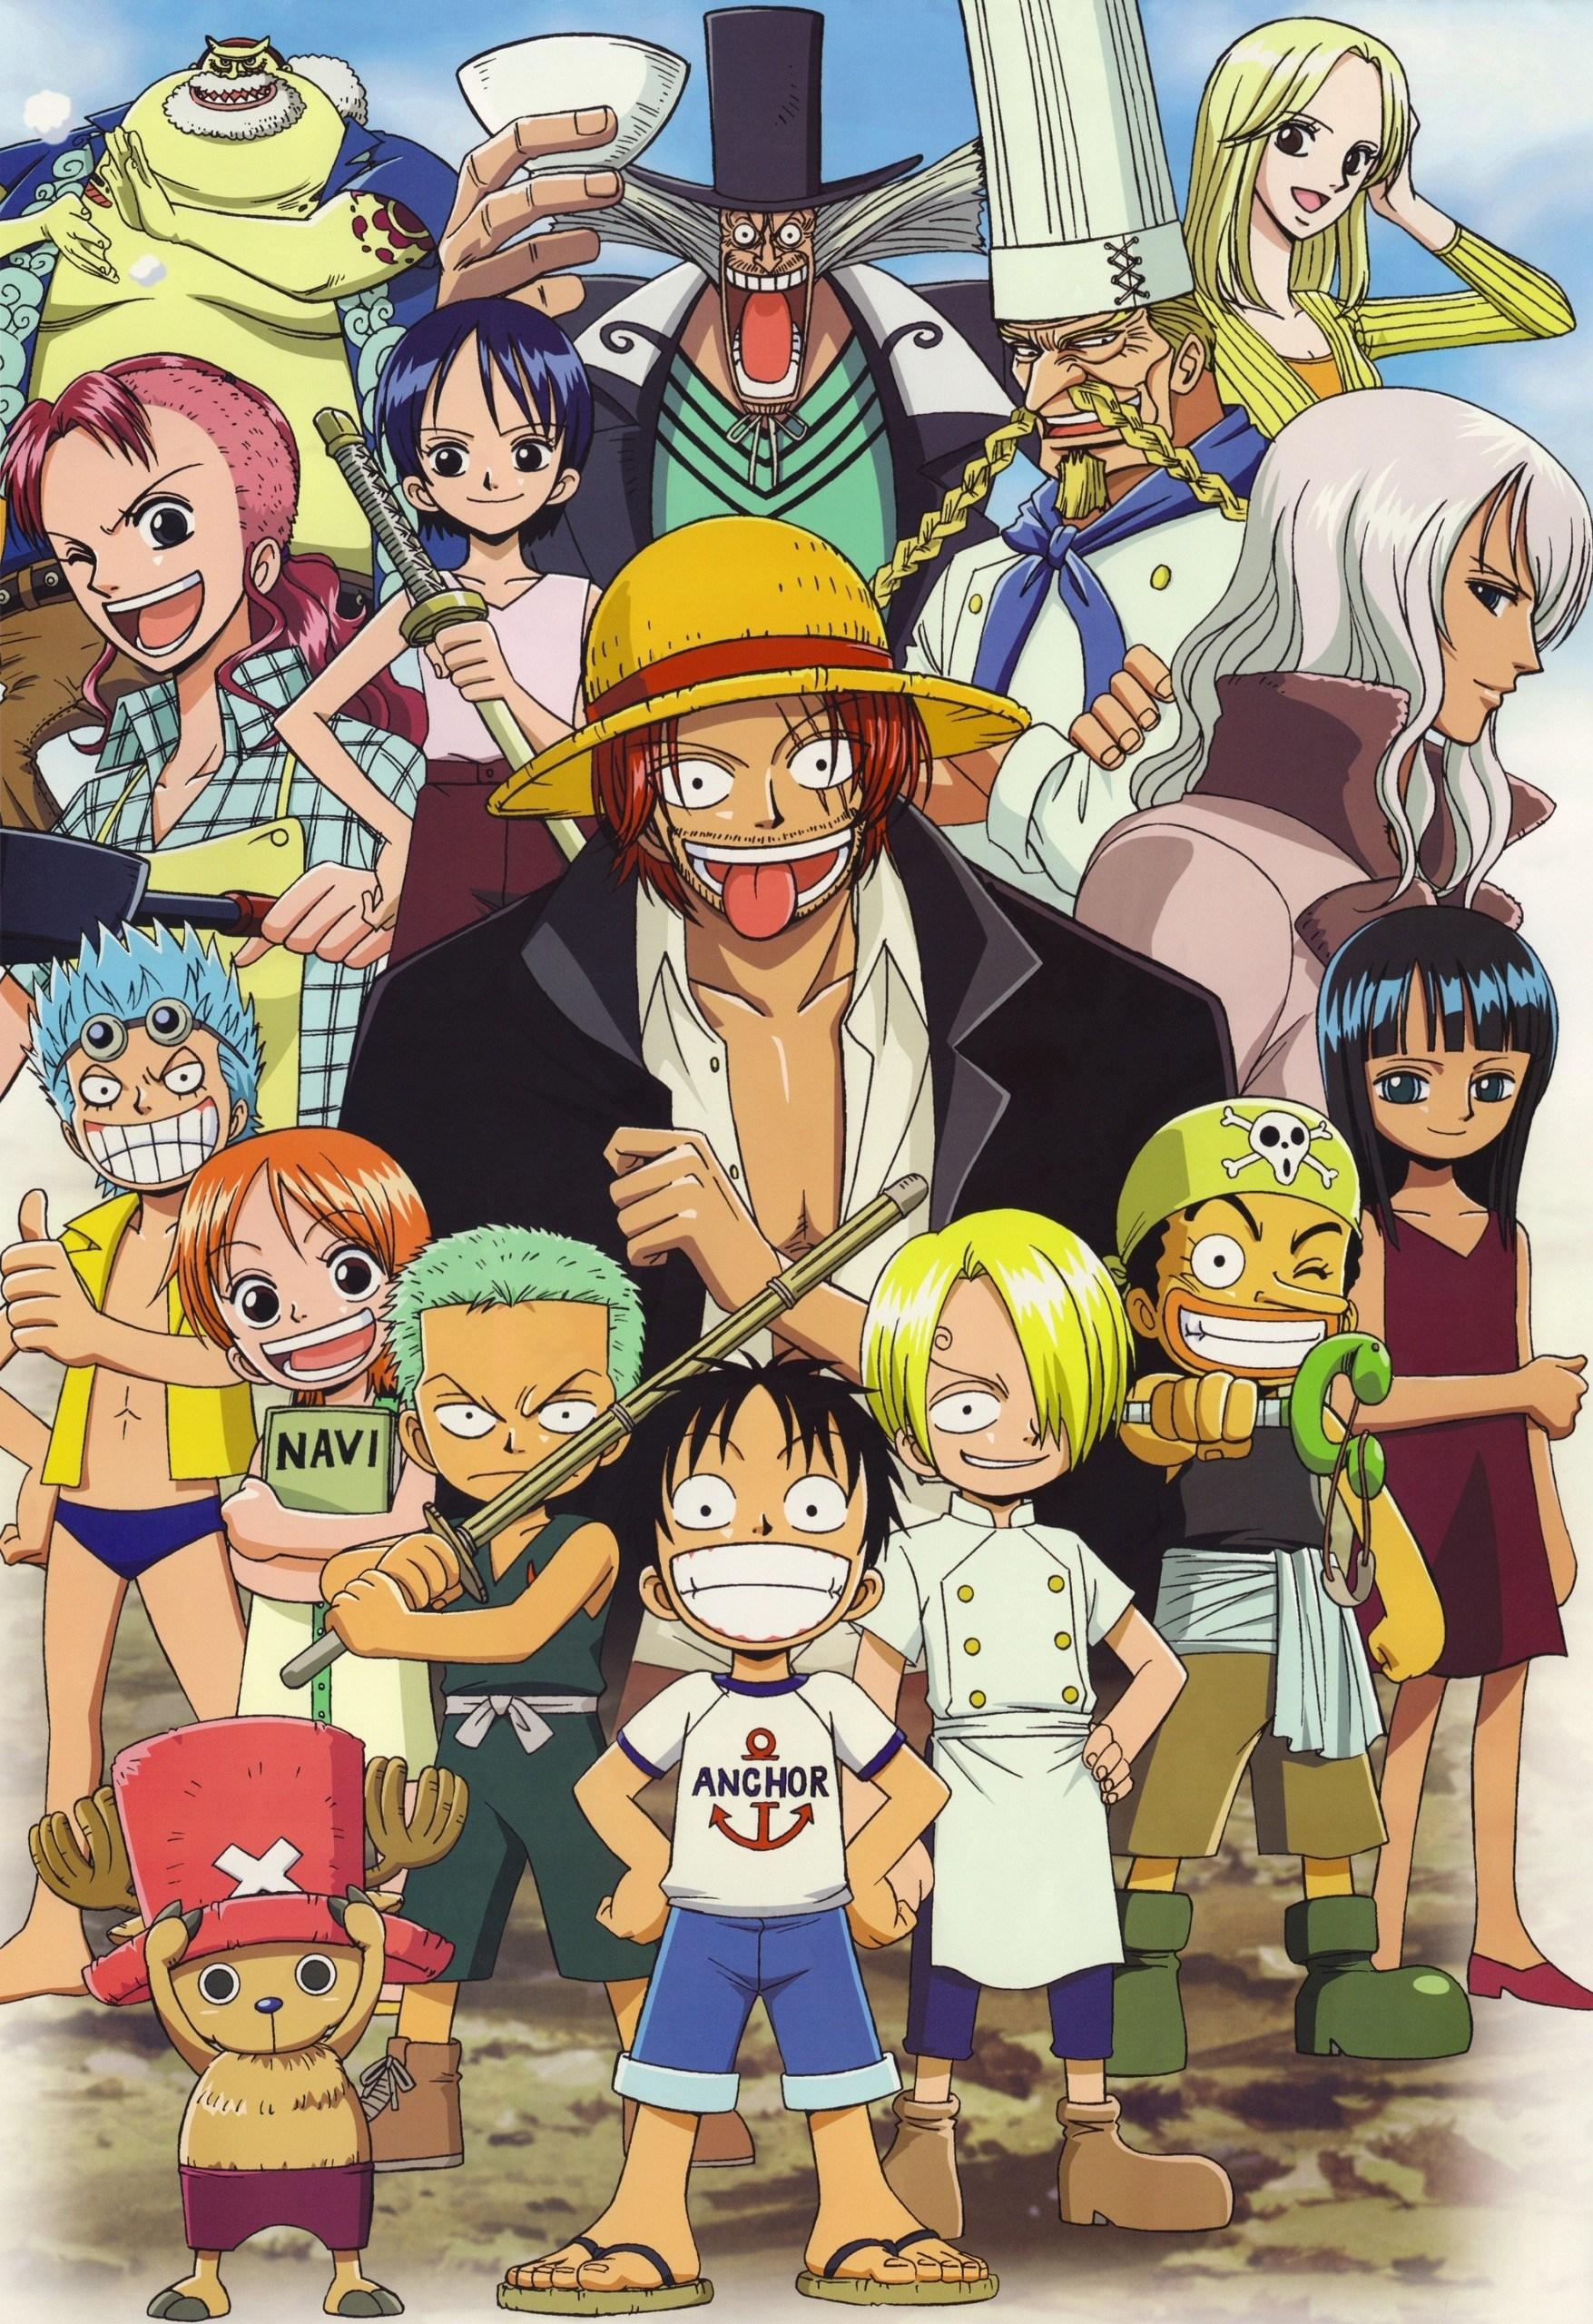 Download Anime One Piece Hd Wallpapers For S7 Edge One Piece